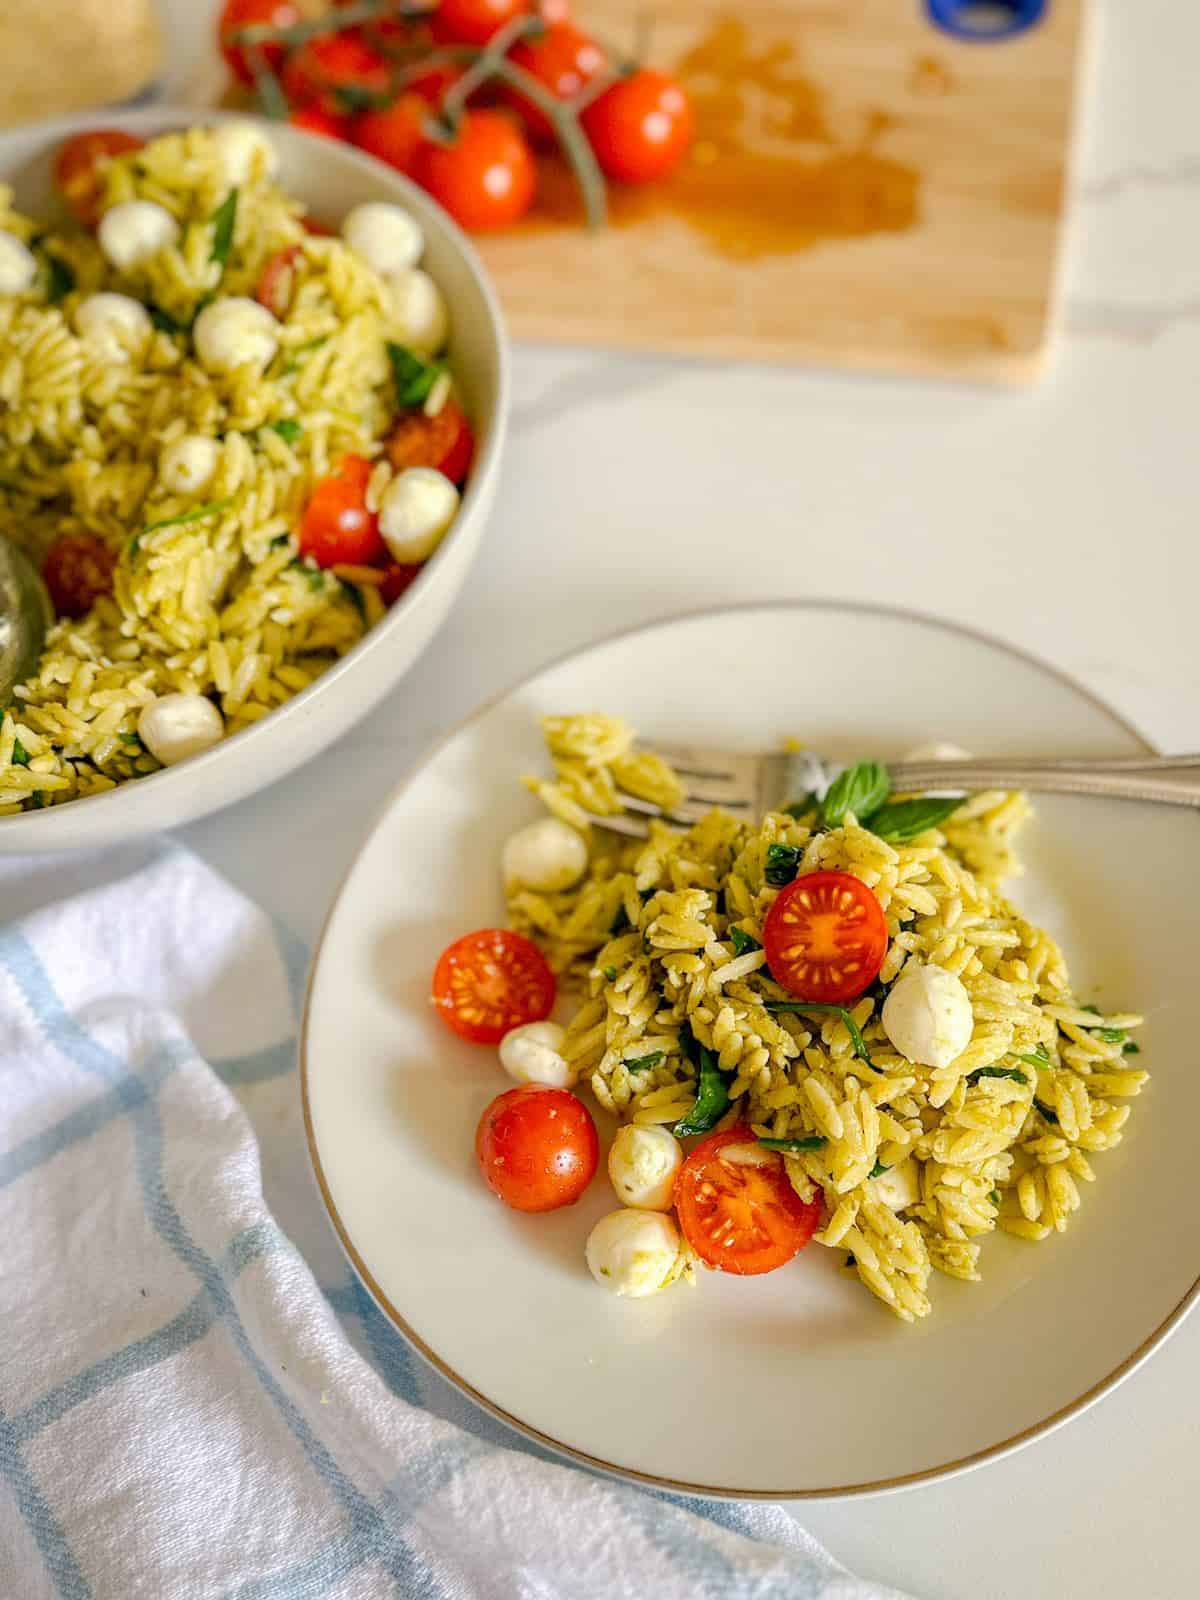 A plate full of orzo pesto salad with a fork.